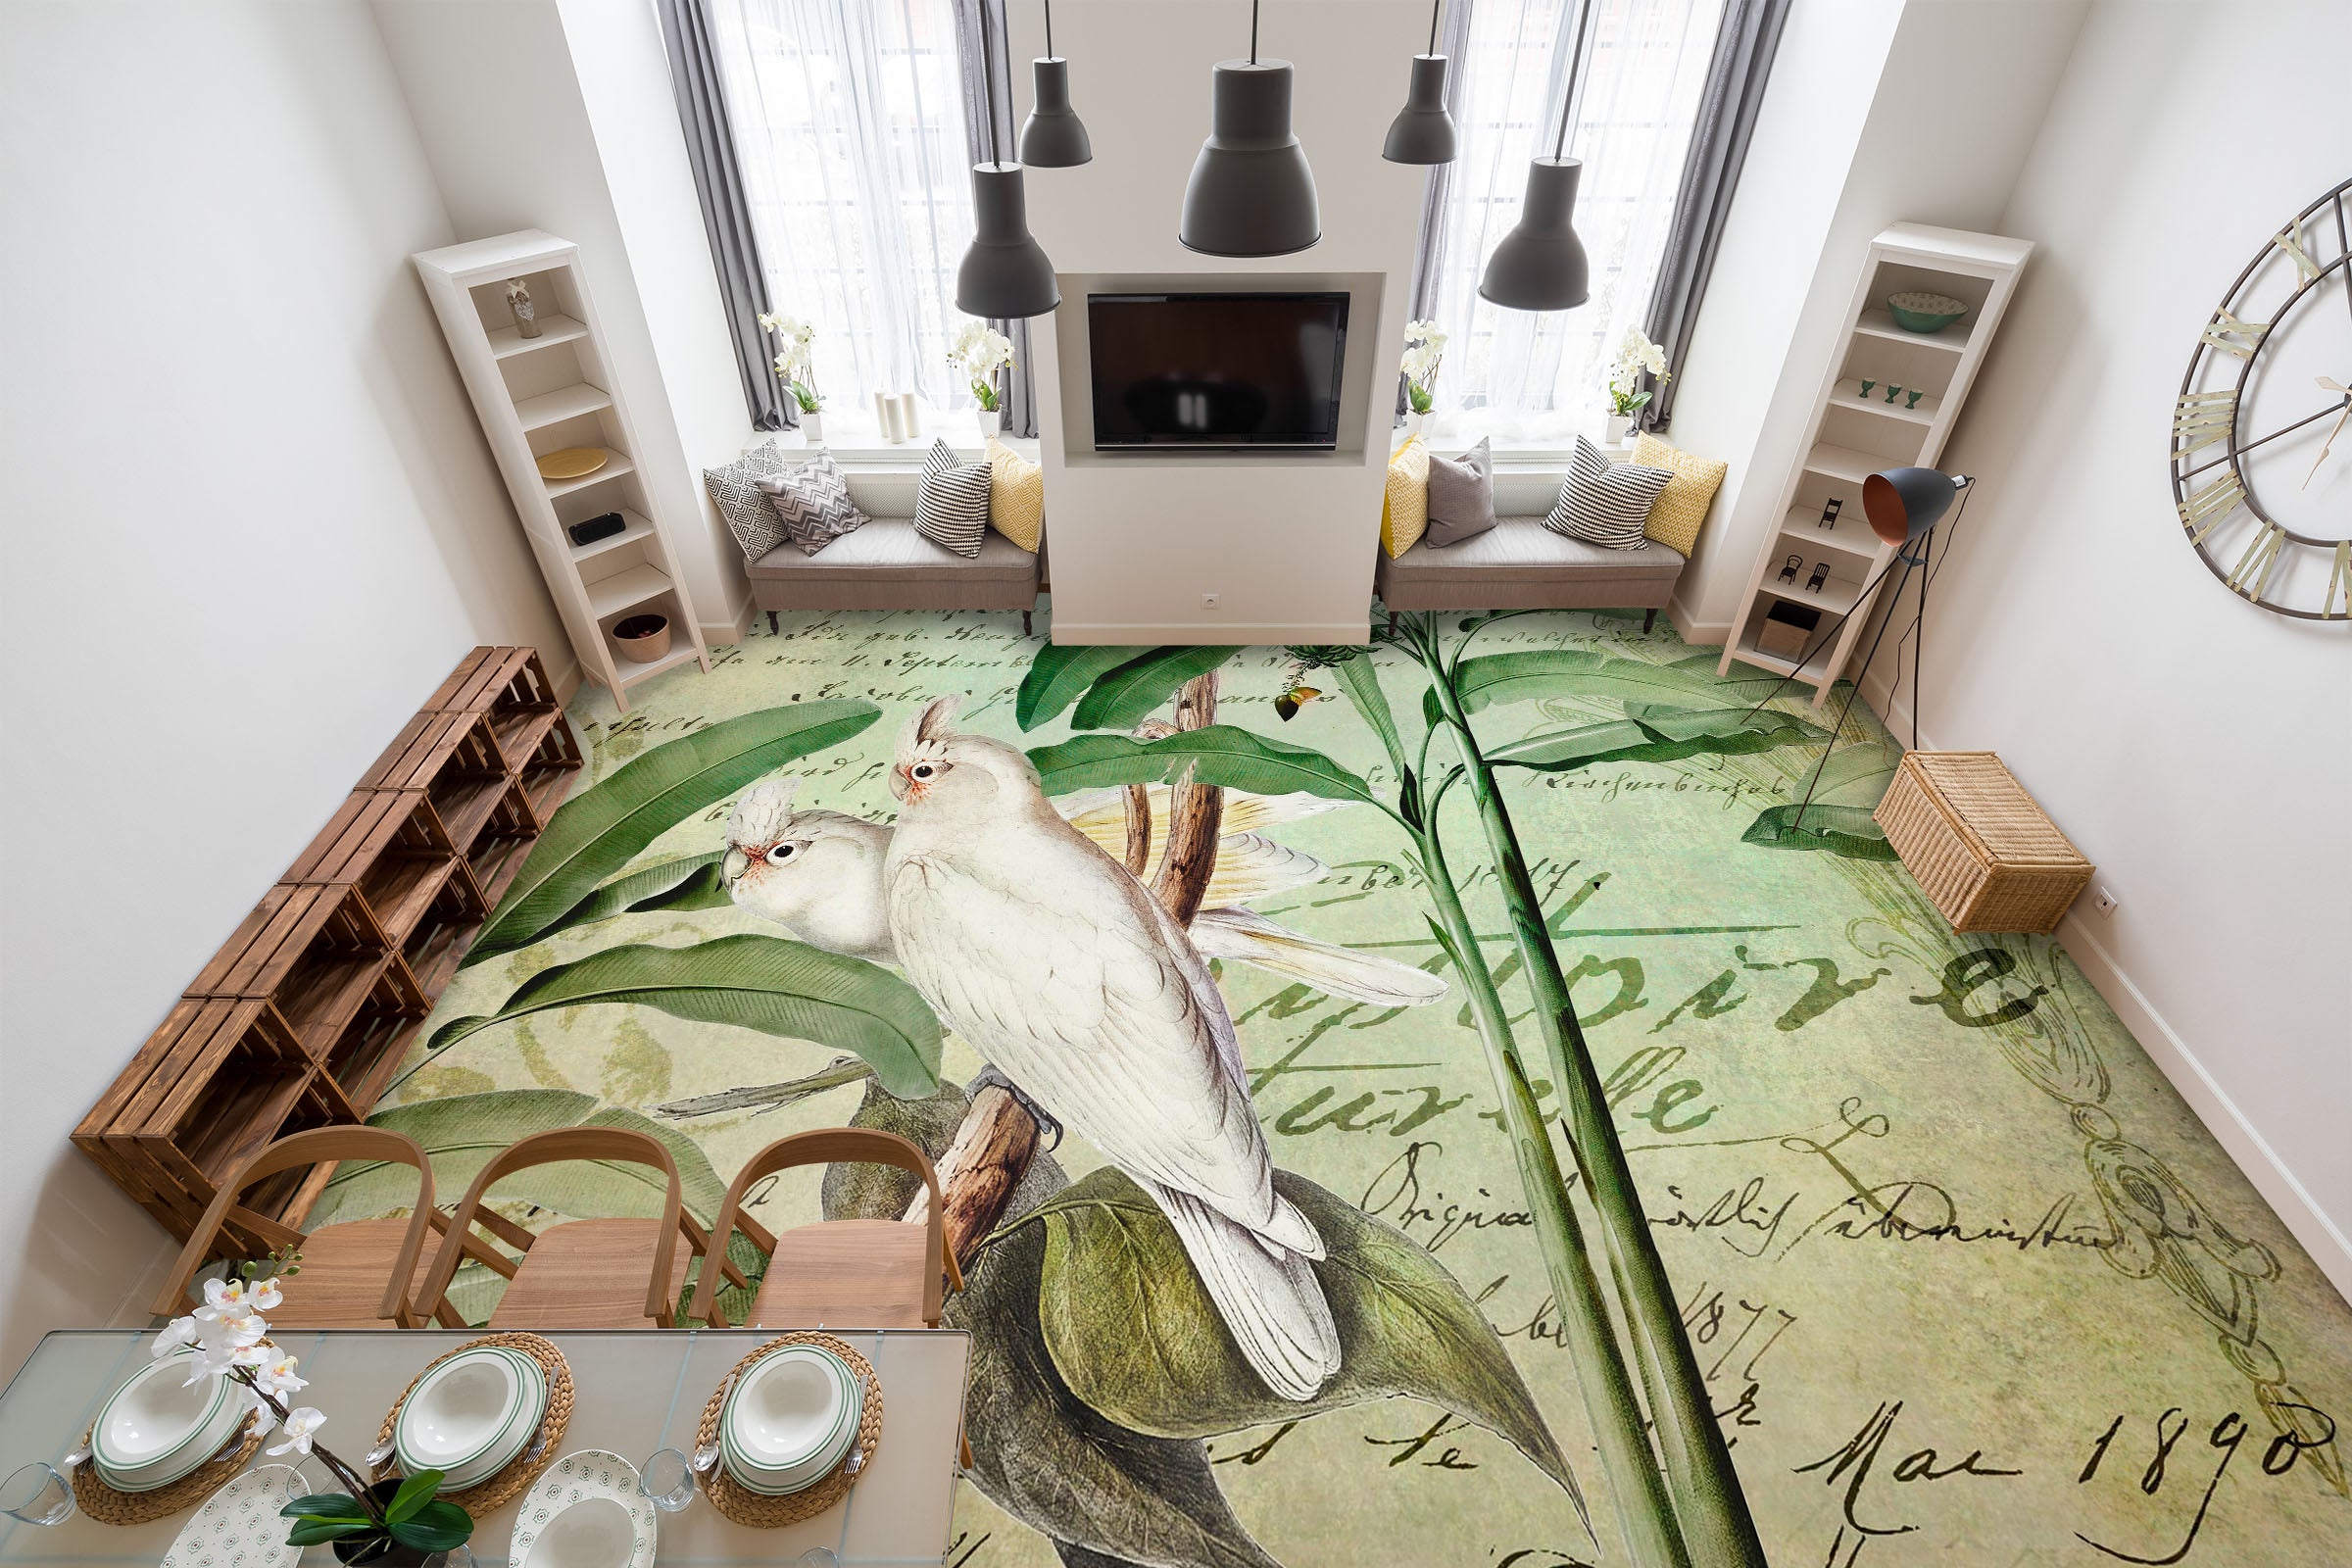 3D White Parrot Leaves 104160 Andrea Haase Floor Mural  Wallpaper Murals Self-Adhesive Removable Print Epoxy